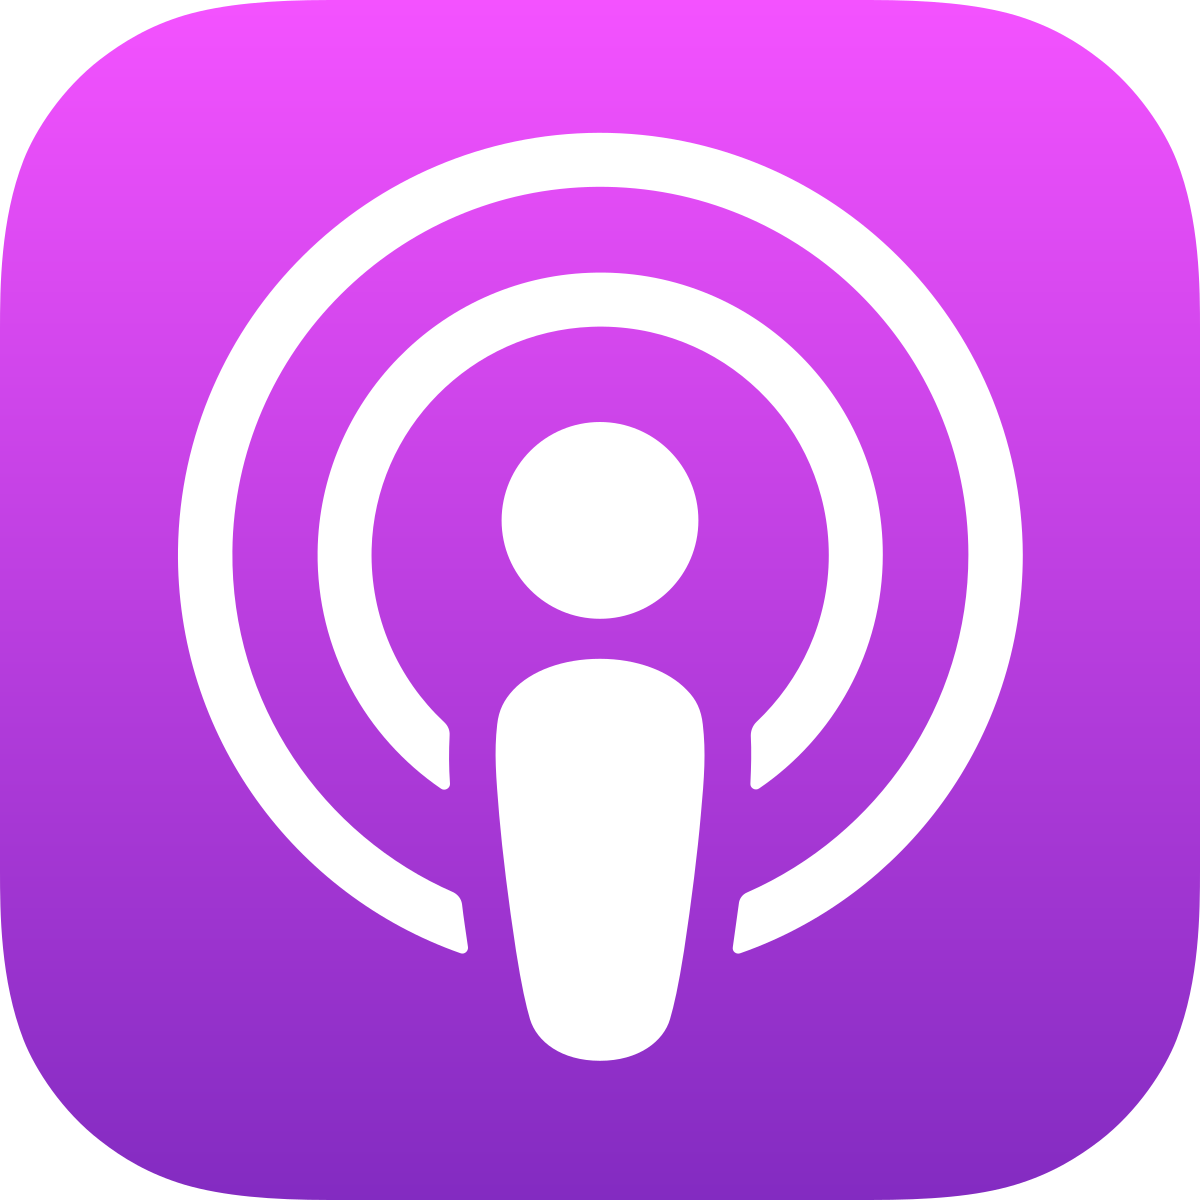 Podcasts_(iOS).svg.png